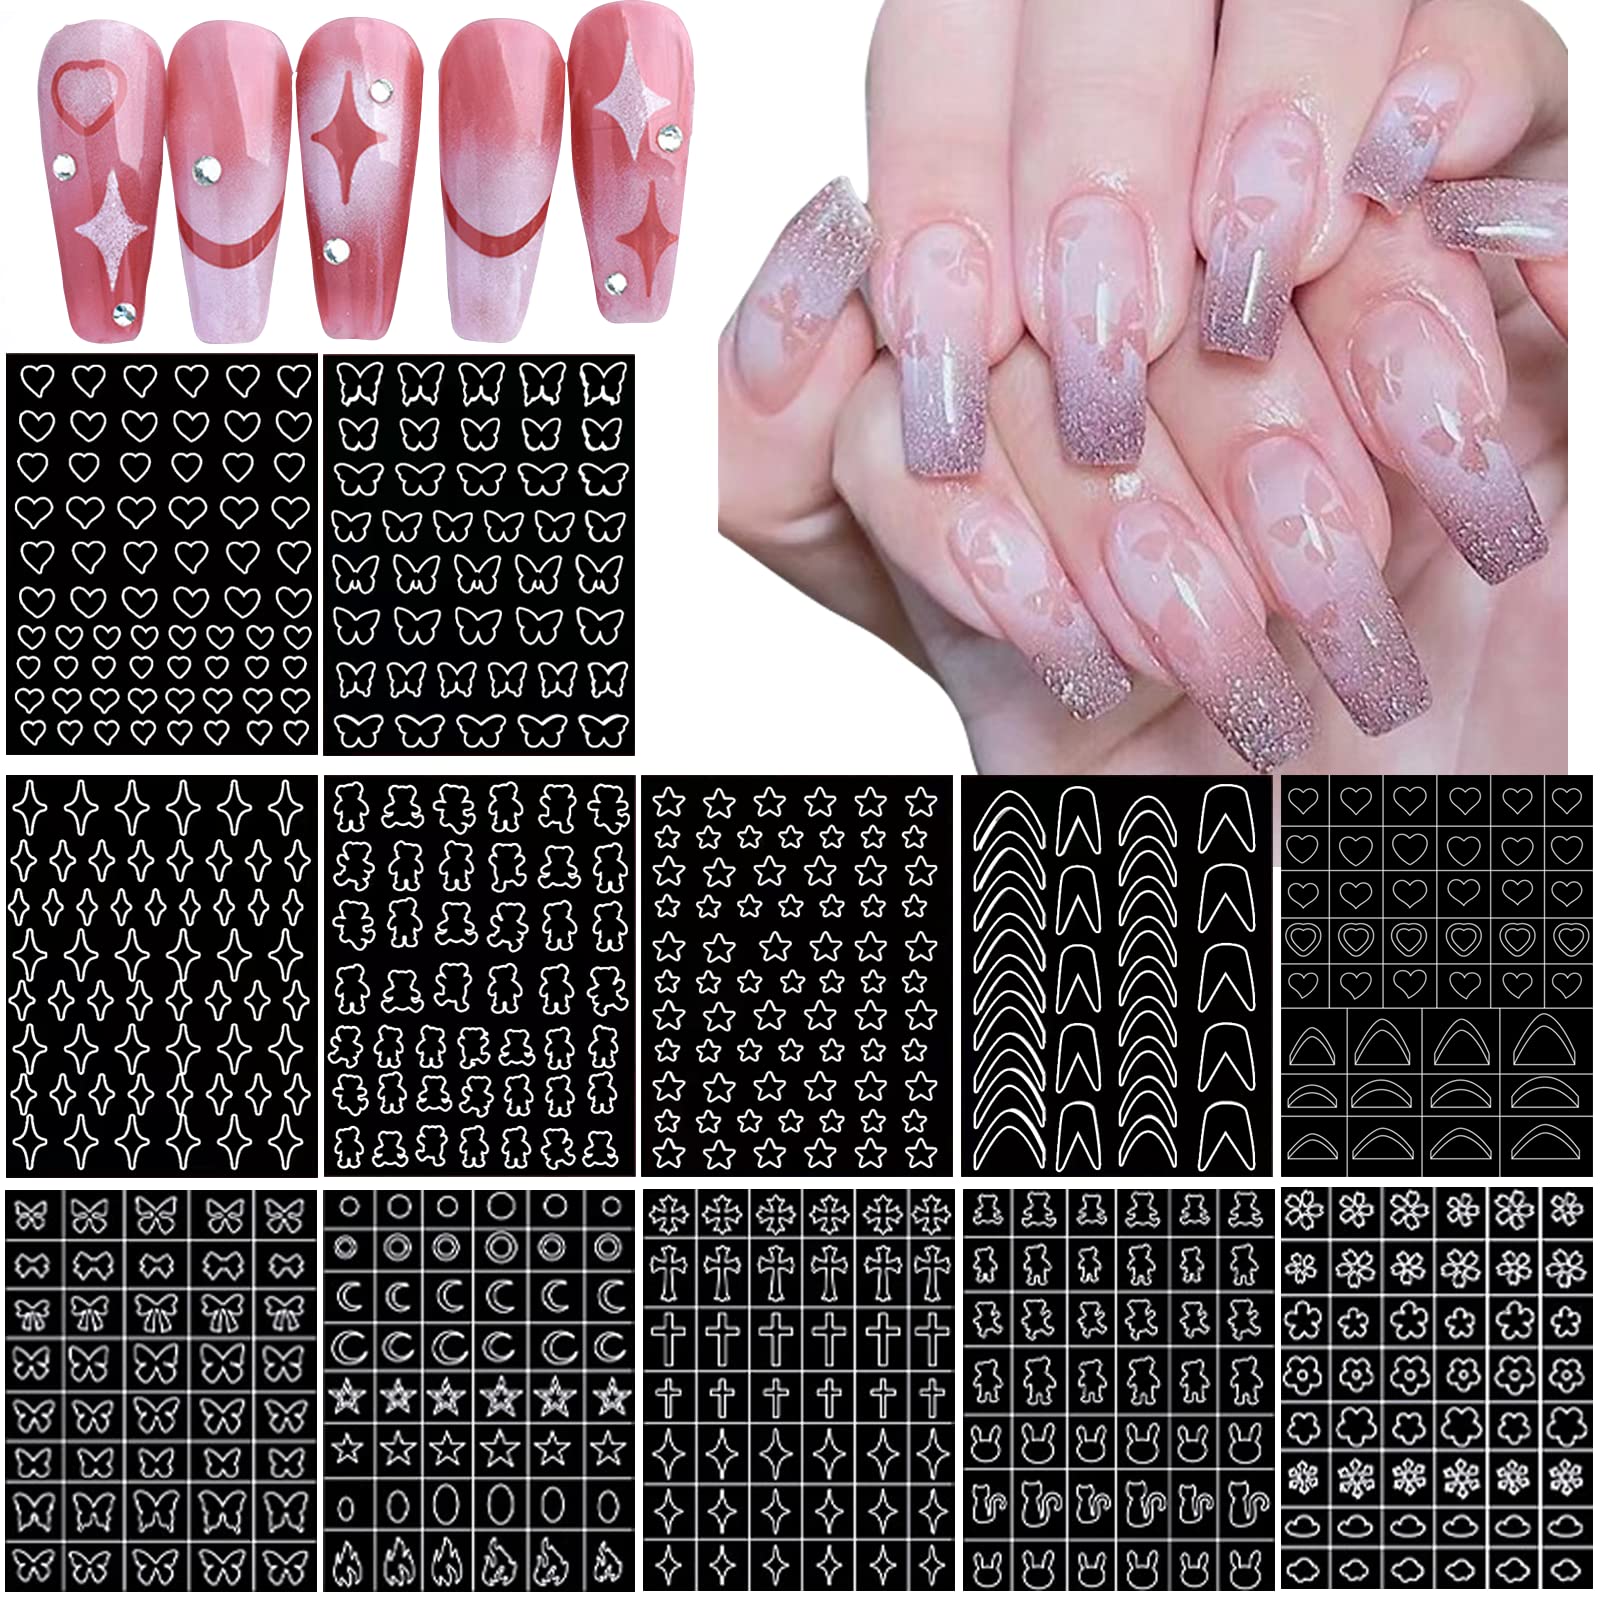 Nail Stamping Products for Stunning Star Nails